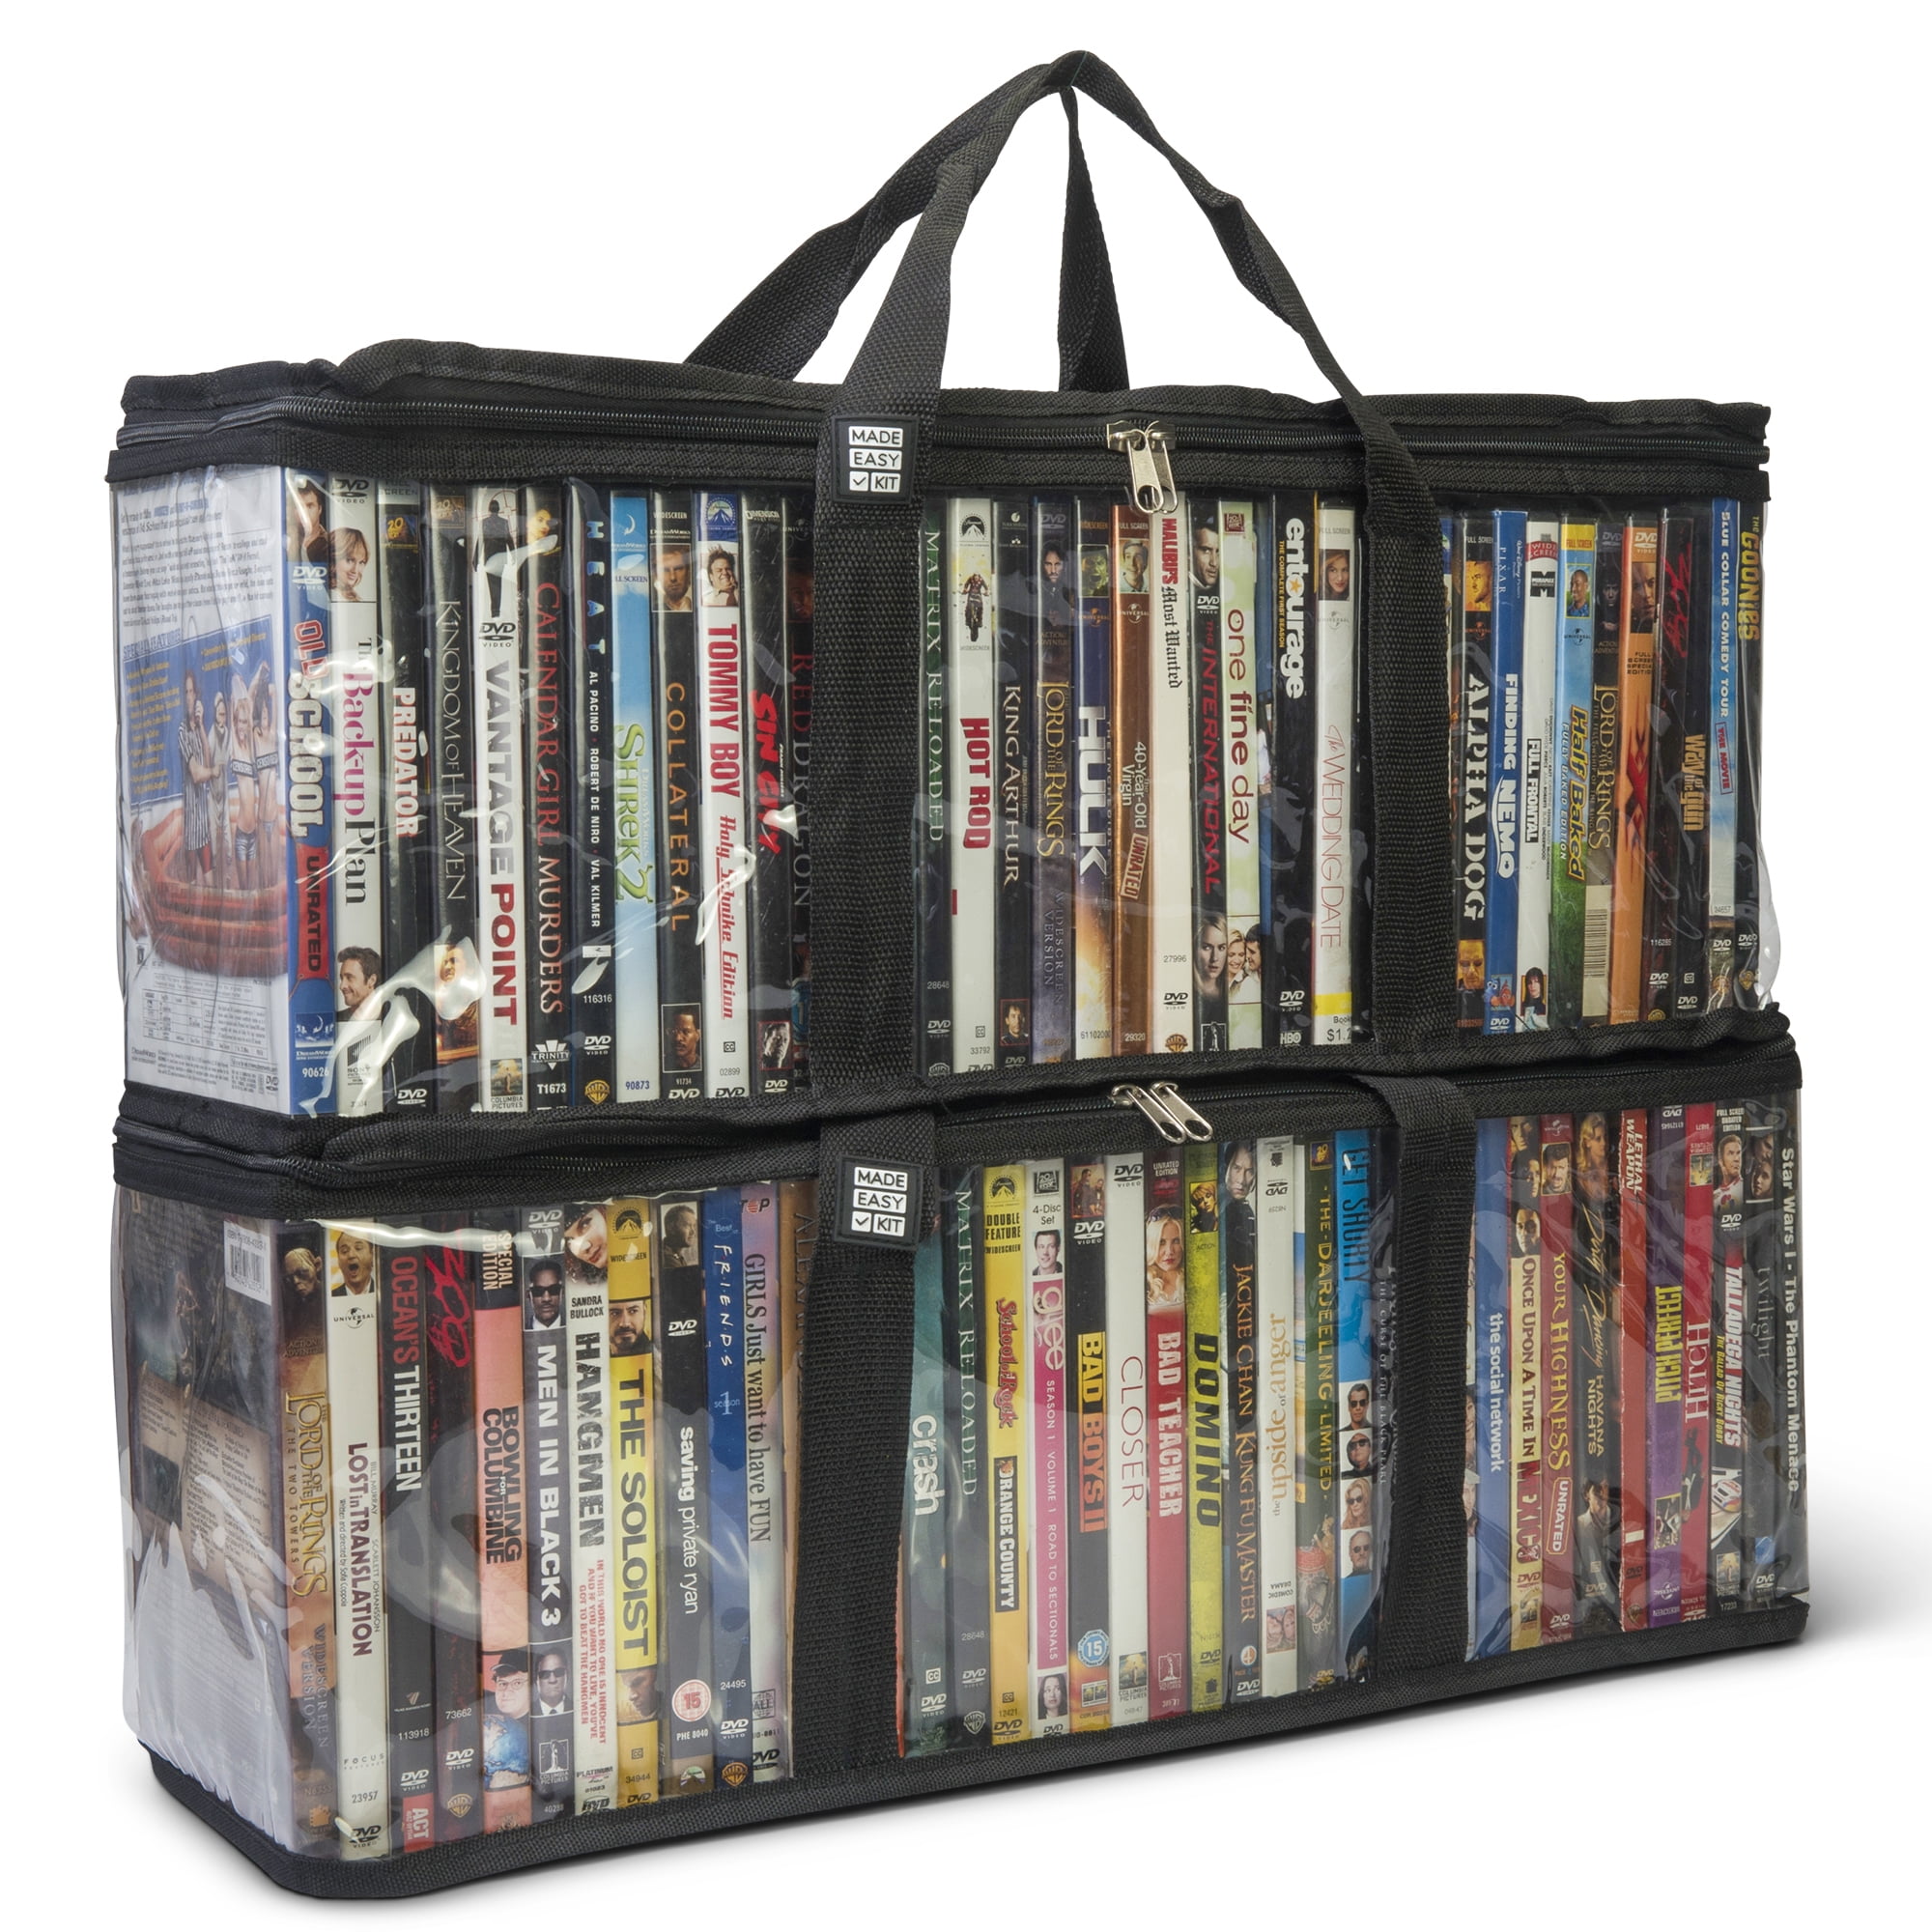 Made Easy Kit DVD Storage Case - Clear PVC Organizer With Triple-Stitched  Handles, Dividers - Stackable, Space-Saving, Fits 40 DVDs - Containers For  Movie Discs, Video Games, VHS Tapes - Black, 2 Bags - Walmart.com